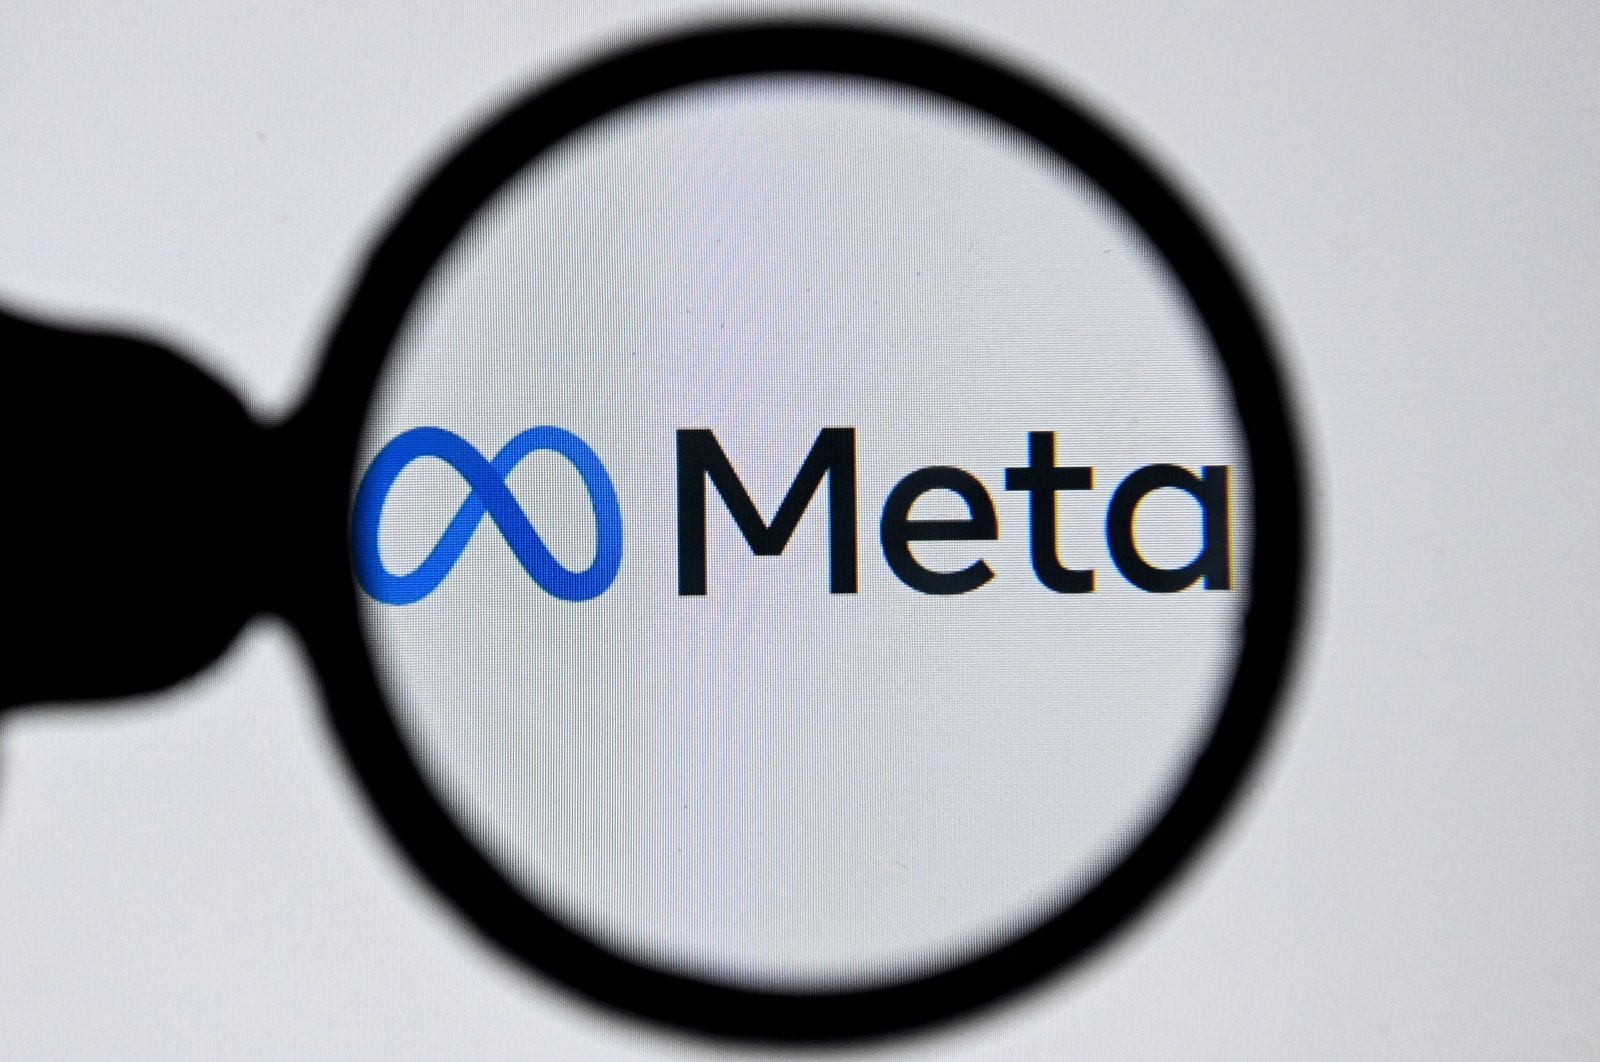 The Meta logo is seen on a laptop screen in Moscow, Russia in this file photo taken on Oct. 28, 2021. (AFP Photo)